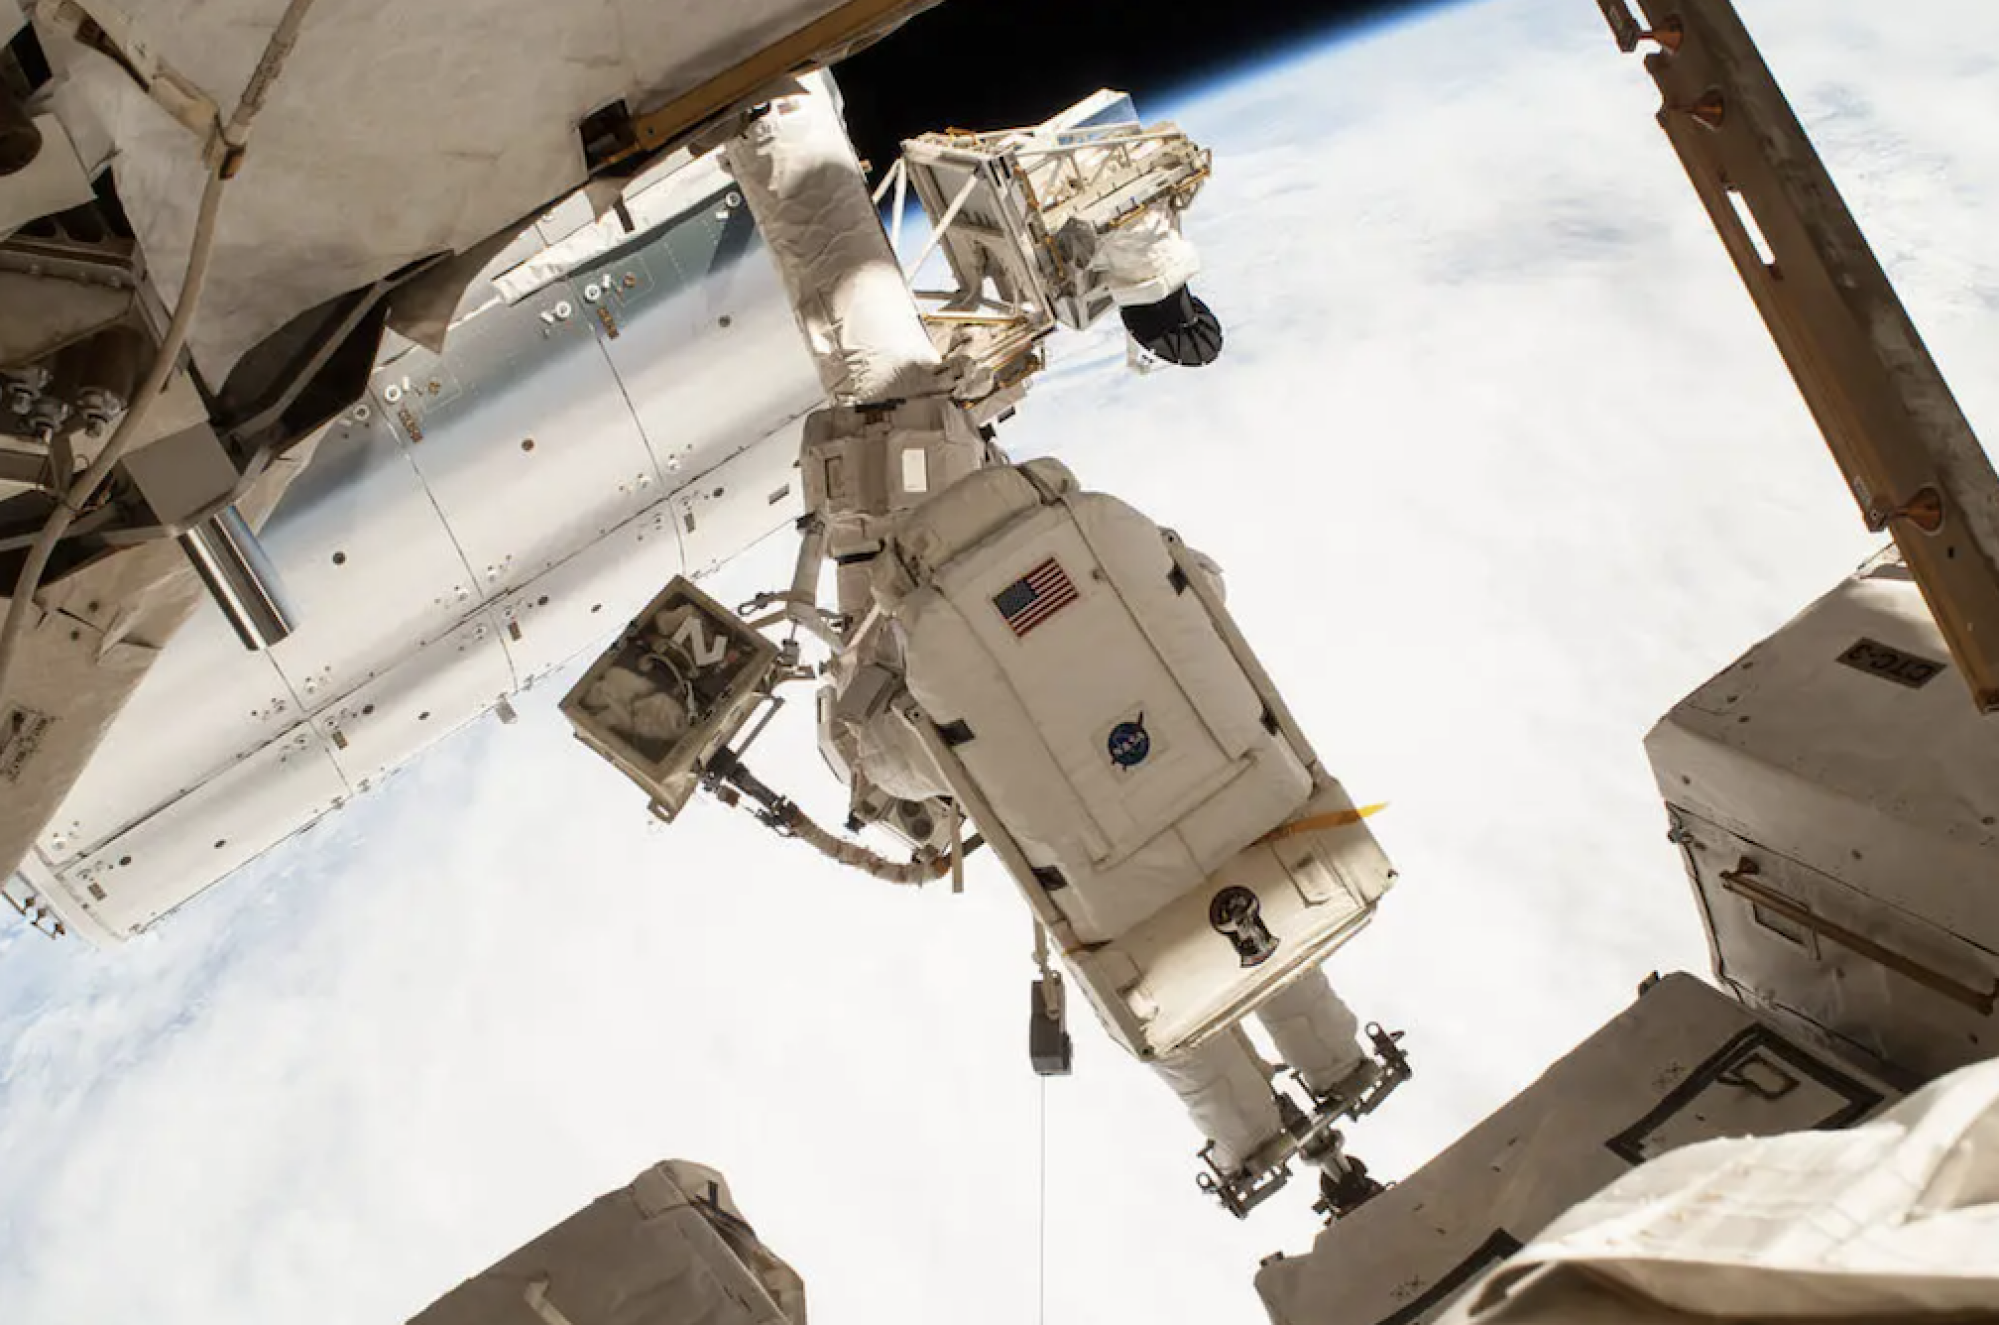 Terry Virts on a spacewalk in 2015.